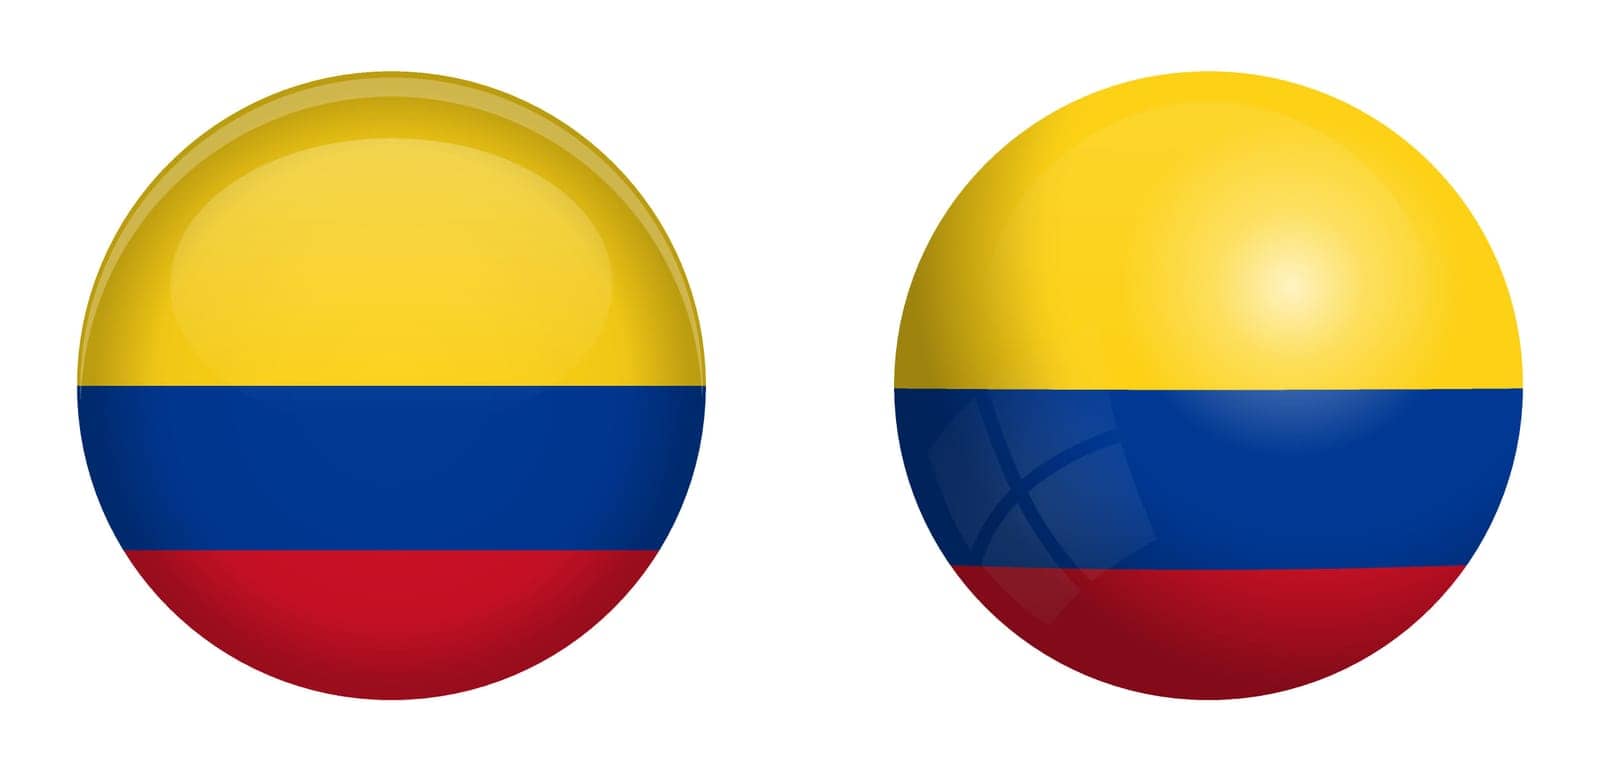 Colombia flag under 3d dome button and on glossy sphere / ball.